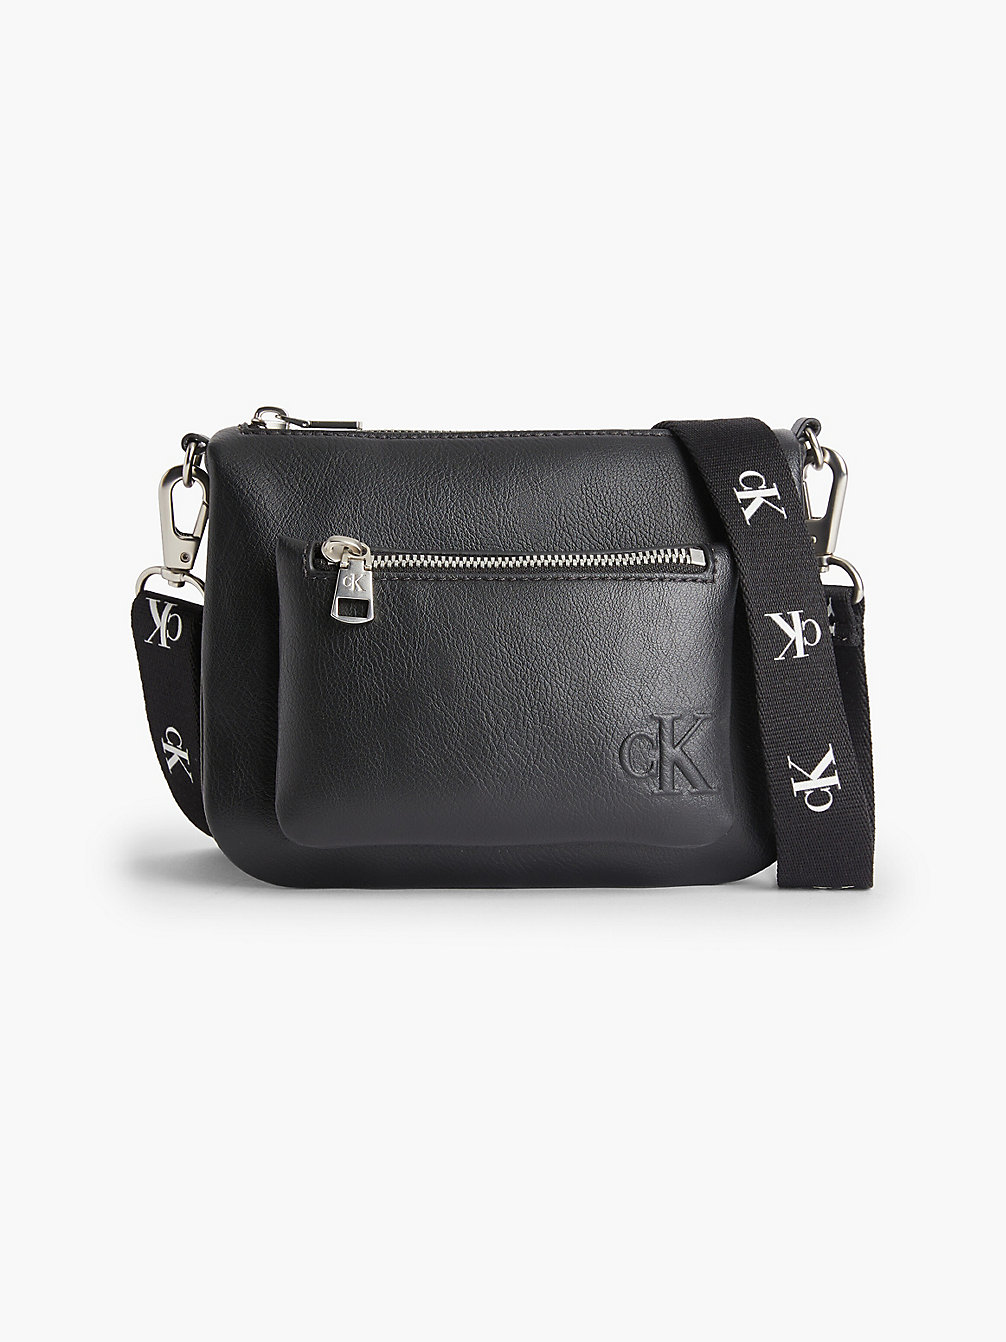 BLACK Recycled Crossbody Bag With Pouch undefined women Calvin Klein